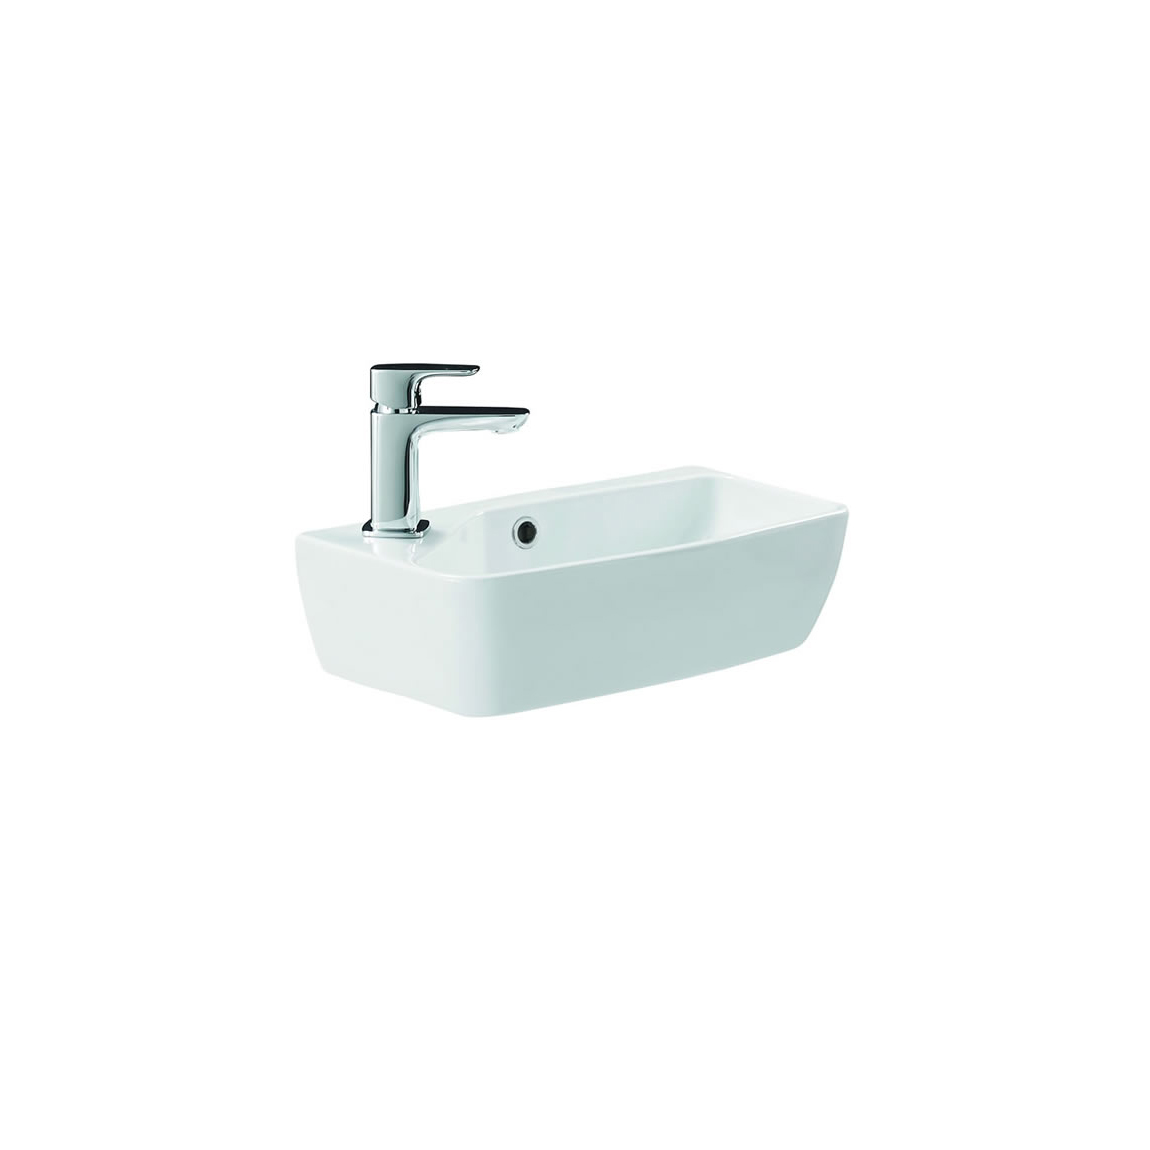 MyHome 1TH Short Projection Basin